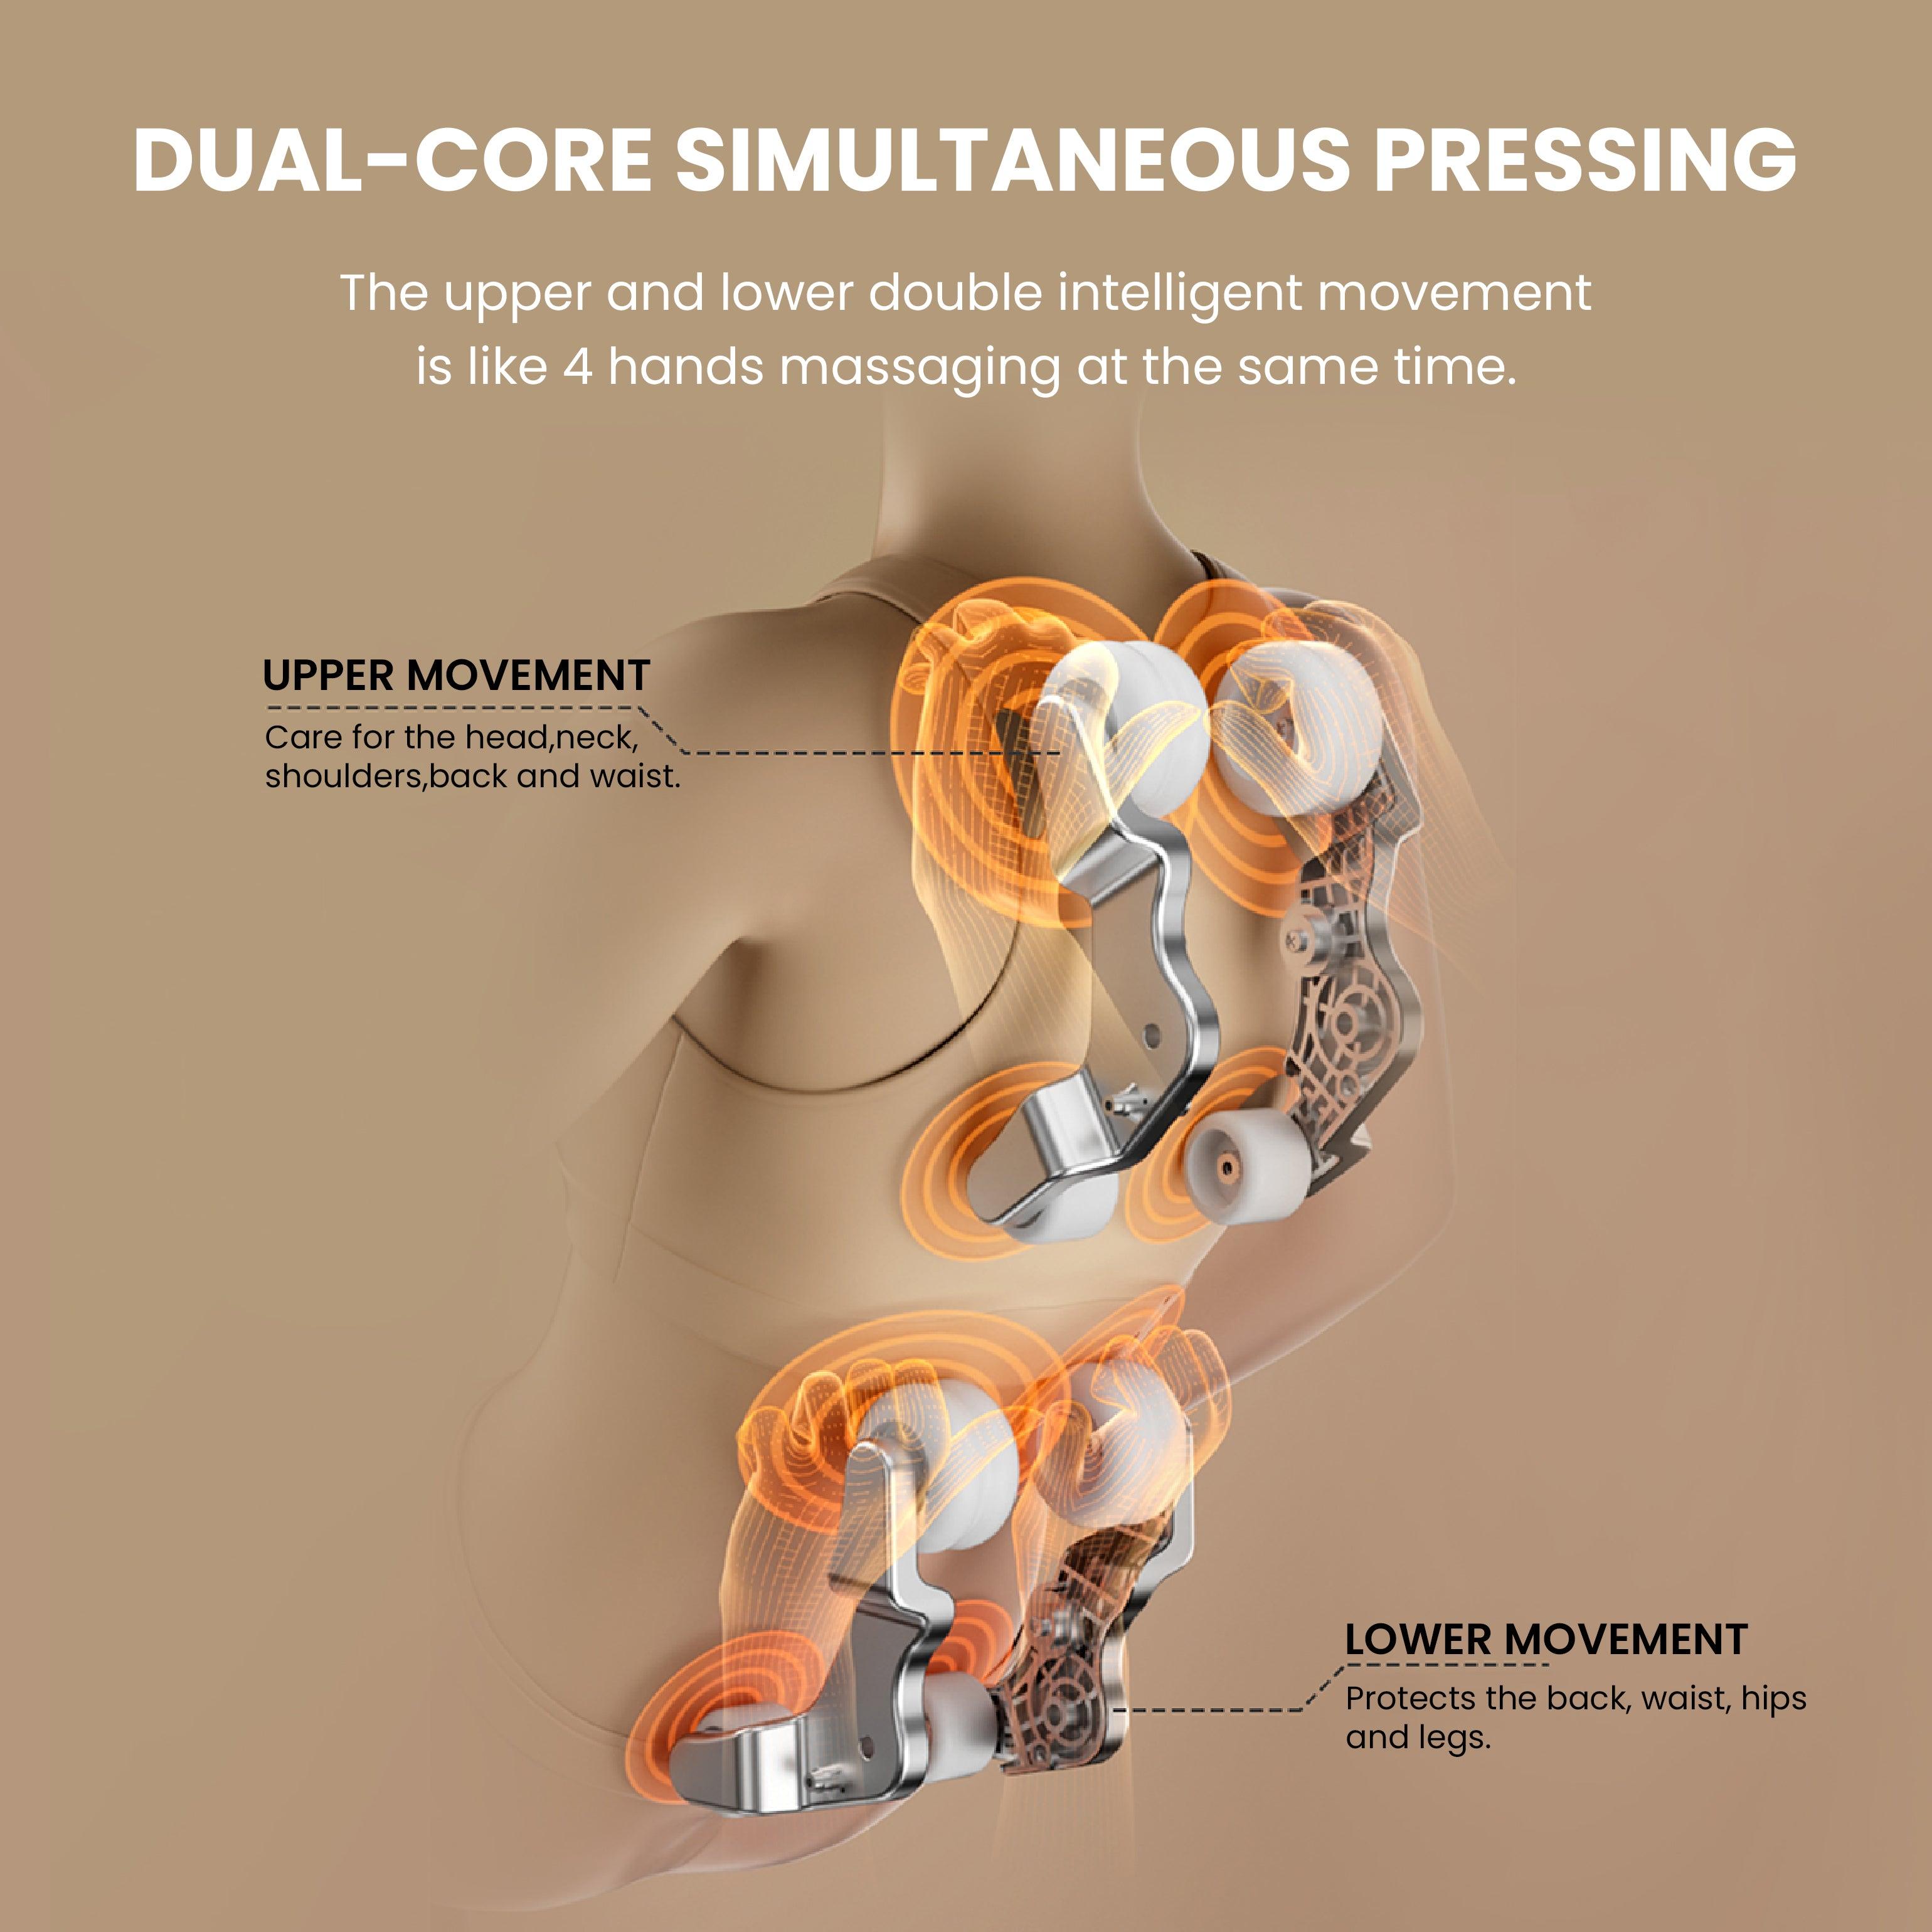 Dual-core simultaneous pressing technology in massage chair demonstrating upper and lower body movements for a 4-hand massage experience